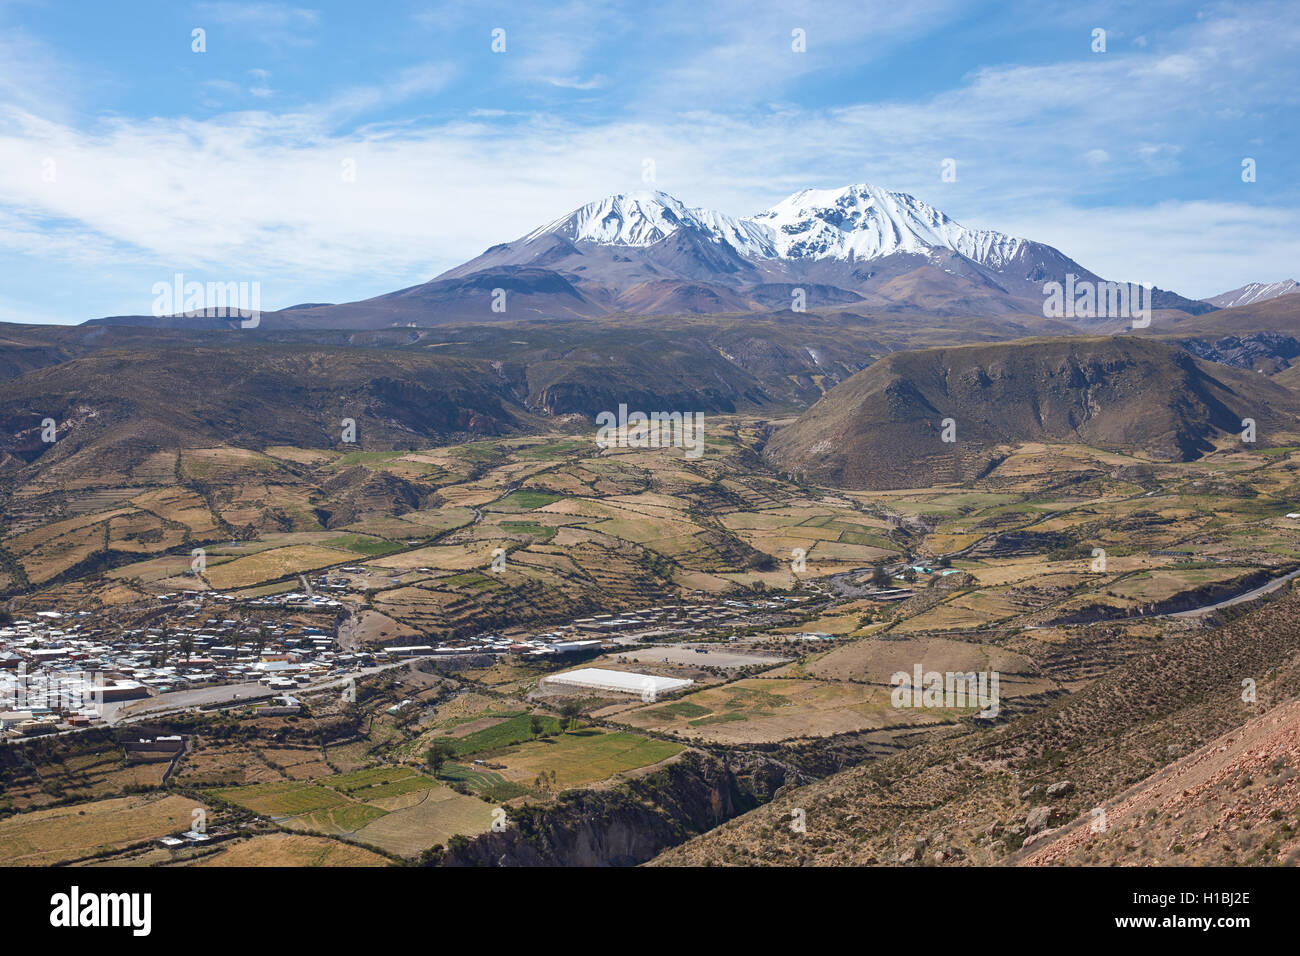 Small town of Putre in the Parinacota region of northern Chile. Stock Photo